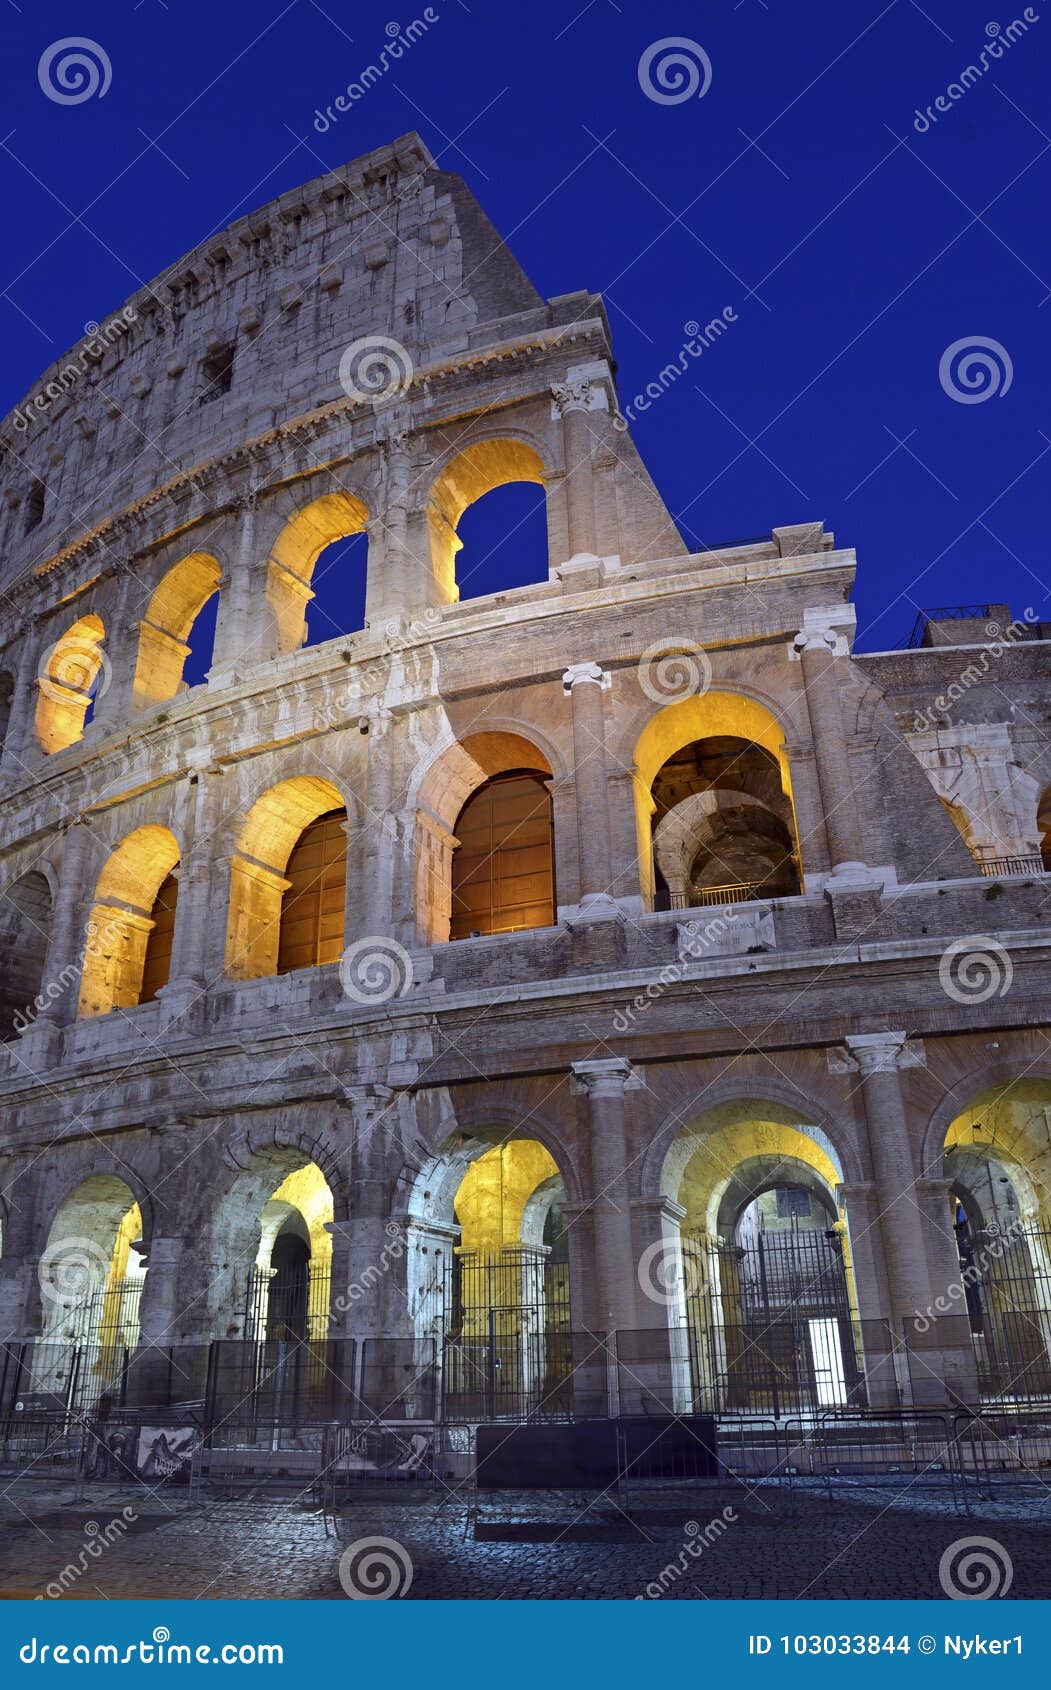 the roman colosseum, a place where gladiators fought as well as being a venue for public entertainment, rome